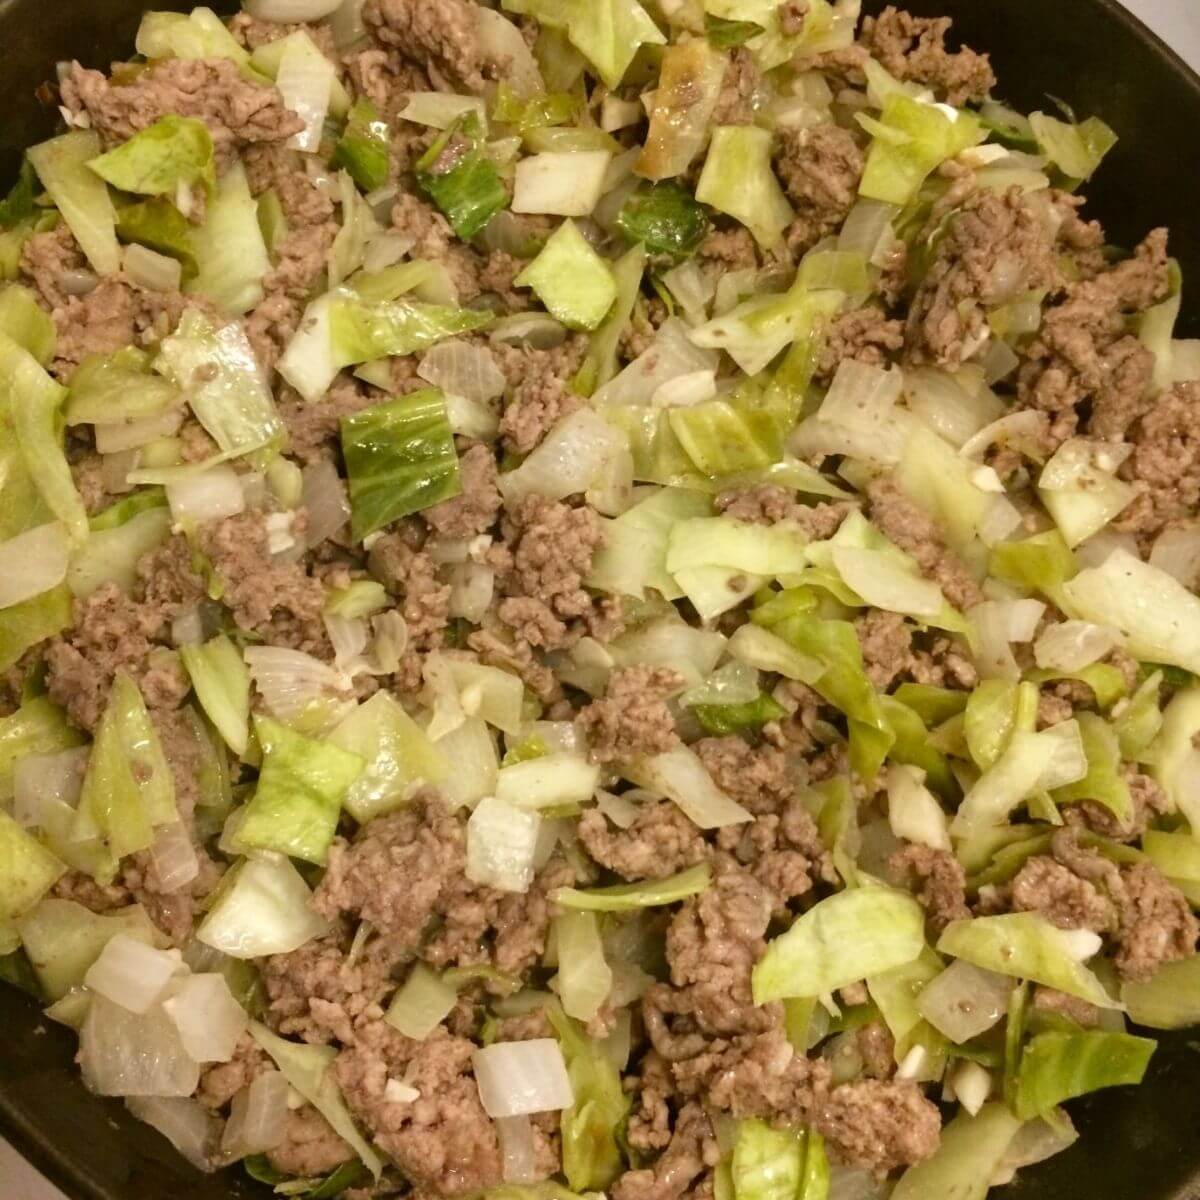 kraut burger filling cooked in cast iron skillet